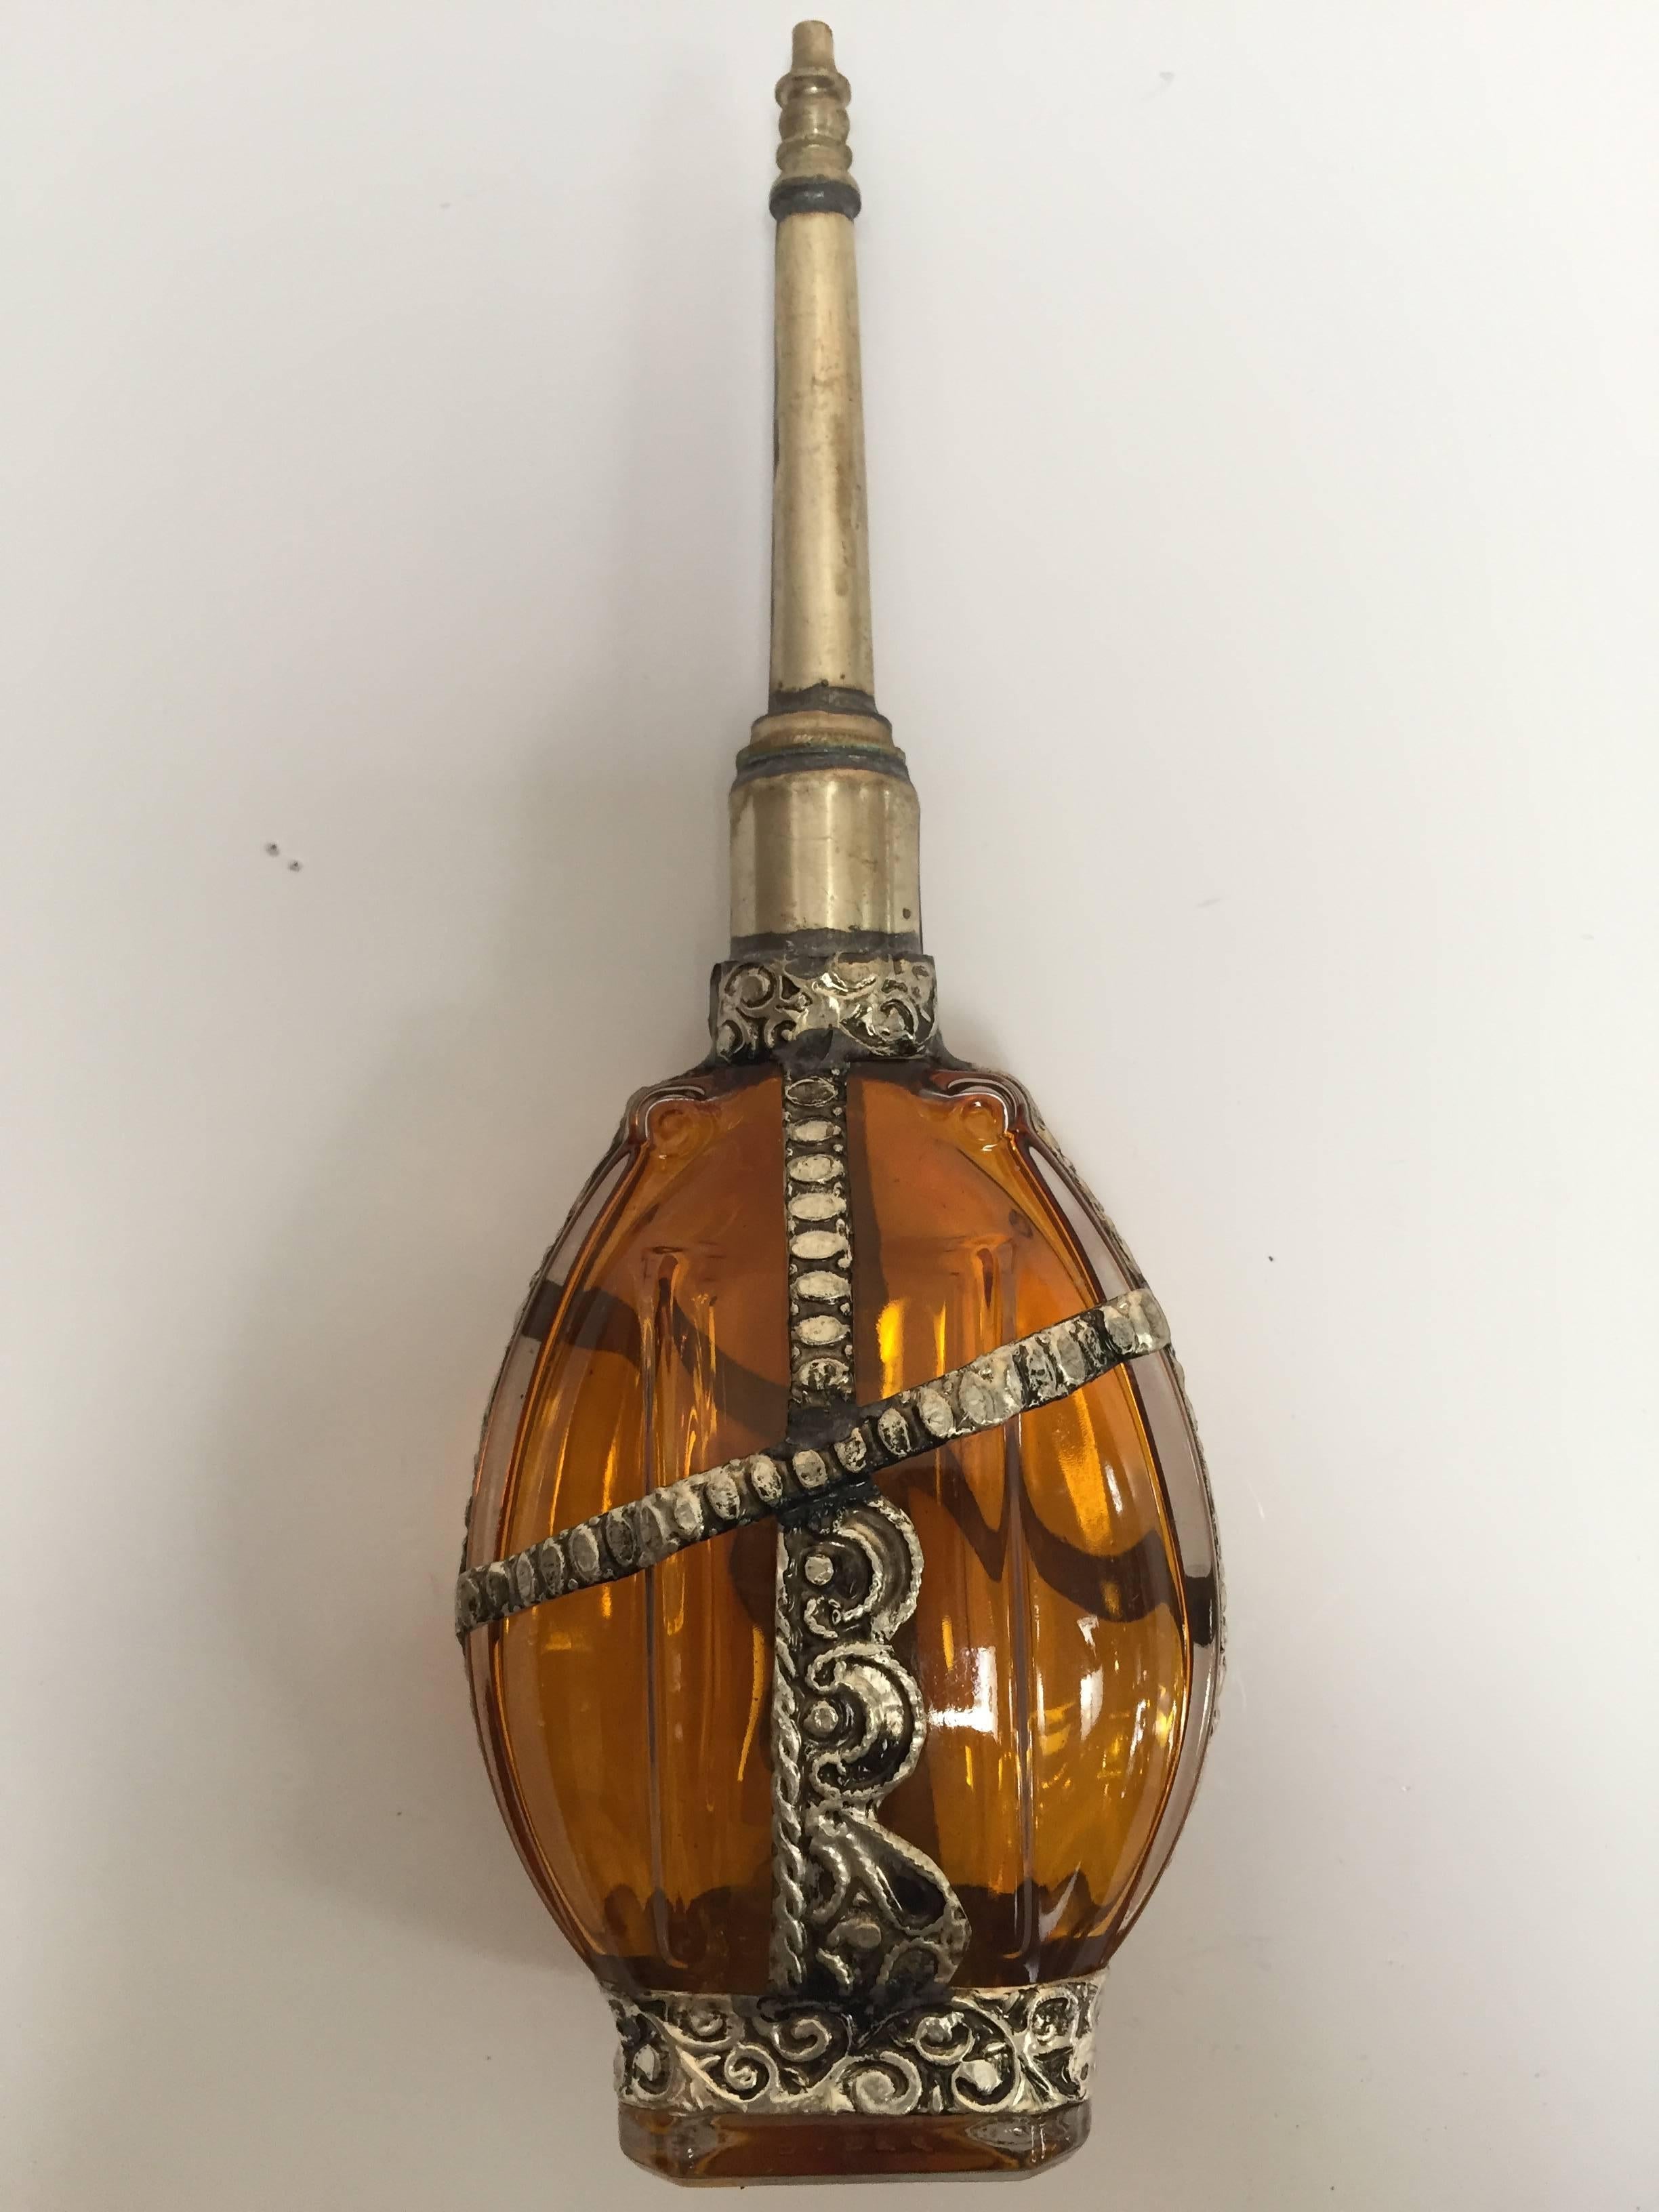 Handcrafted Moroccan Moorish glass perfume bottle or rose water sprinkler with raised embossed silvered metal floral design over amber glass.
The pressed glass bottle in Art Deco, Art Nouveau style is oval shape with curved sides and hand decorated